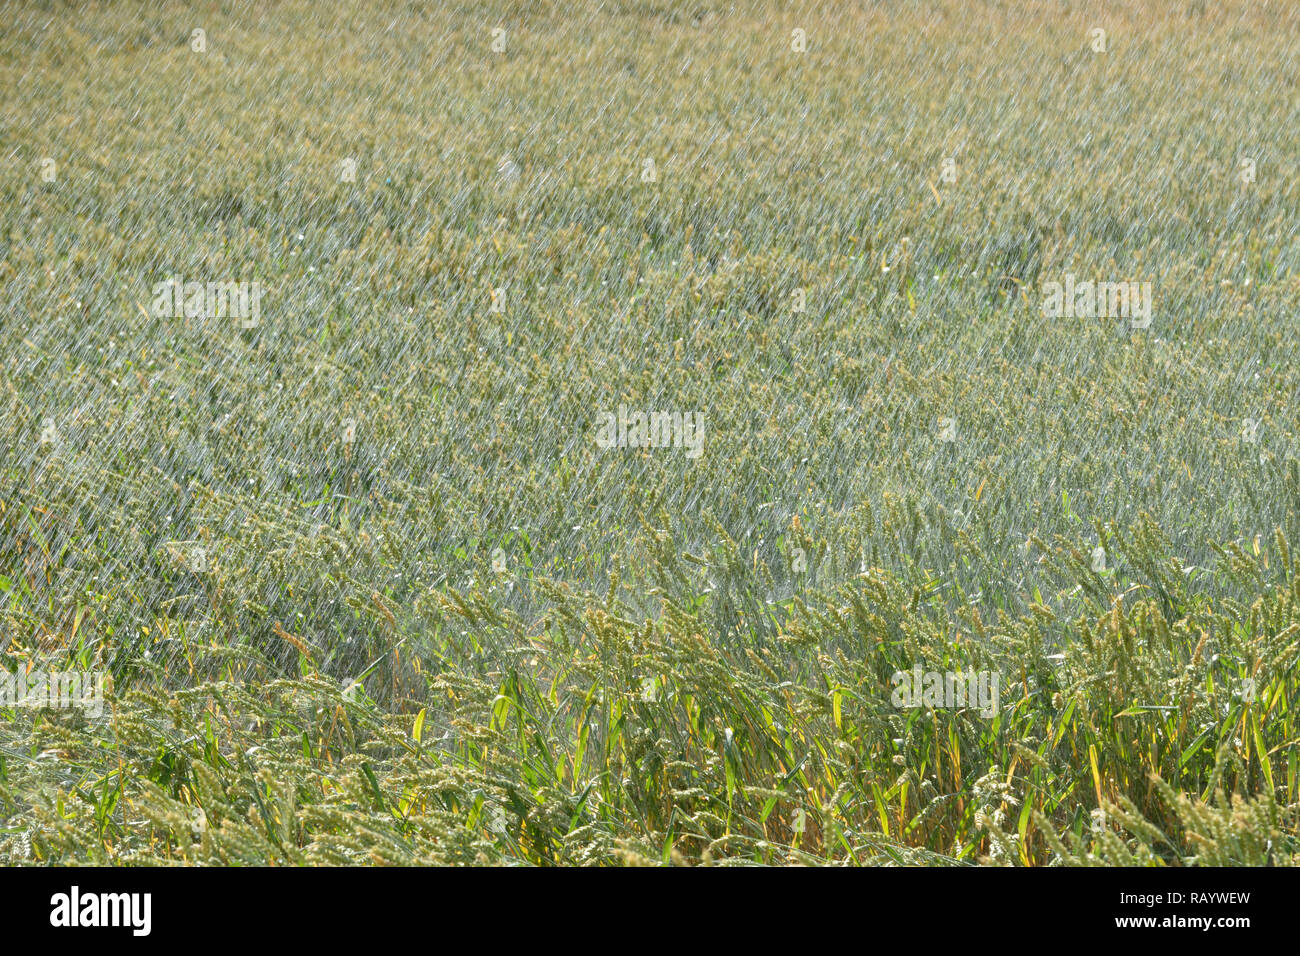 Sprinkler irrigation machine spraying water over farmland during a drought summer, watering a wheat field, hot summer 2018. Stock Photo